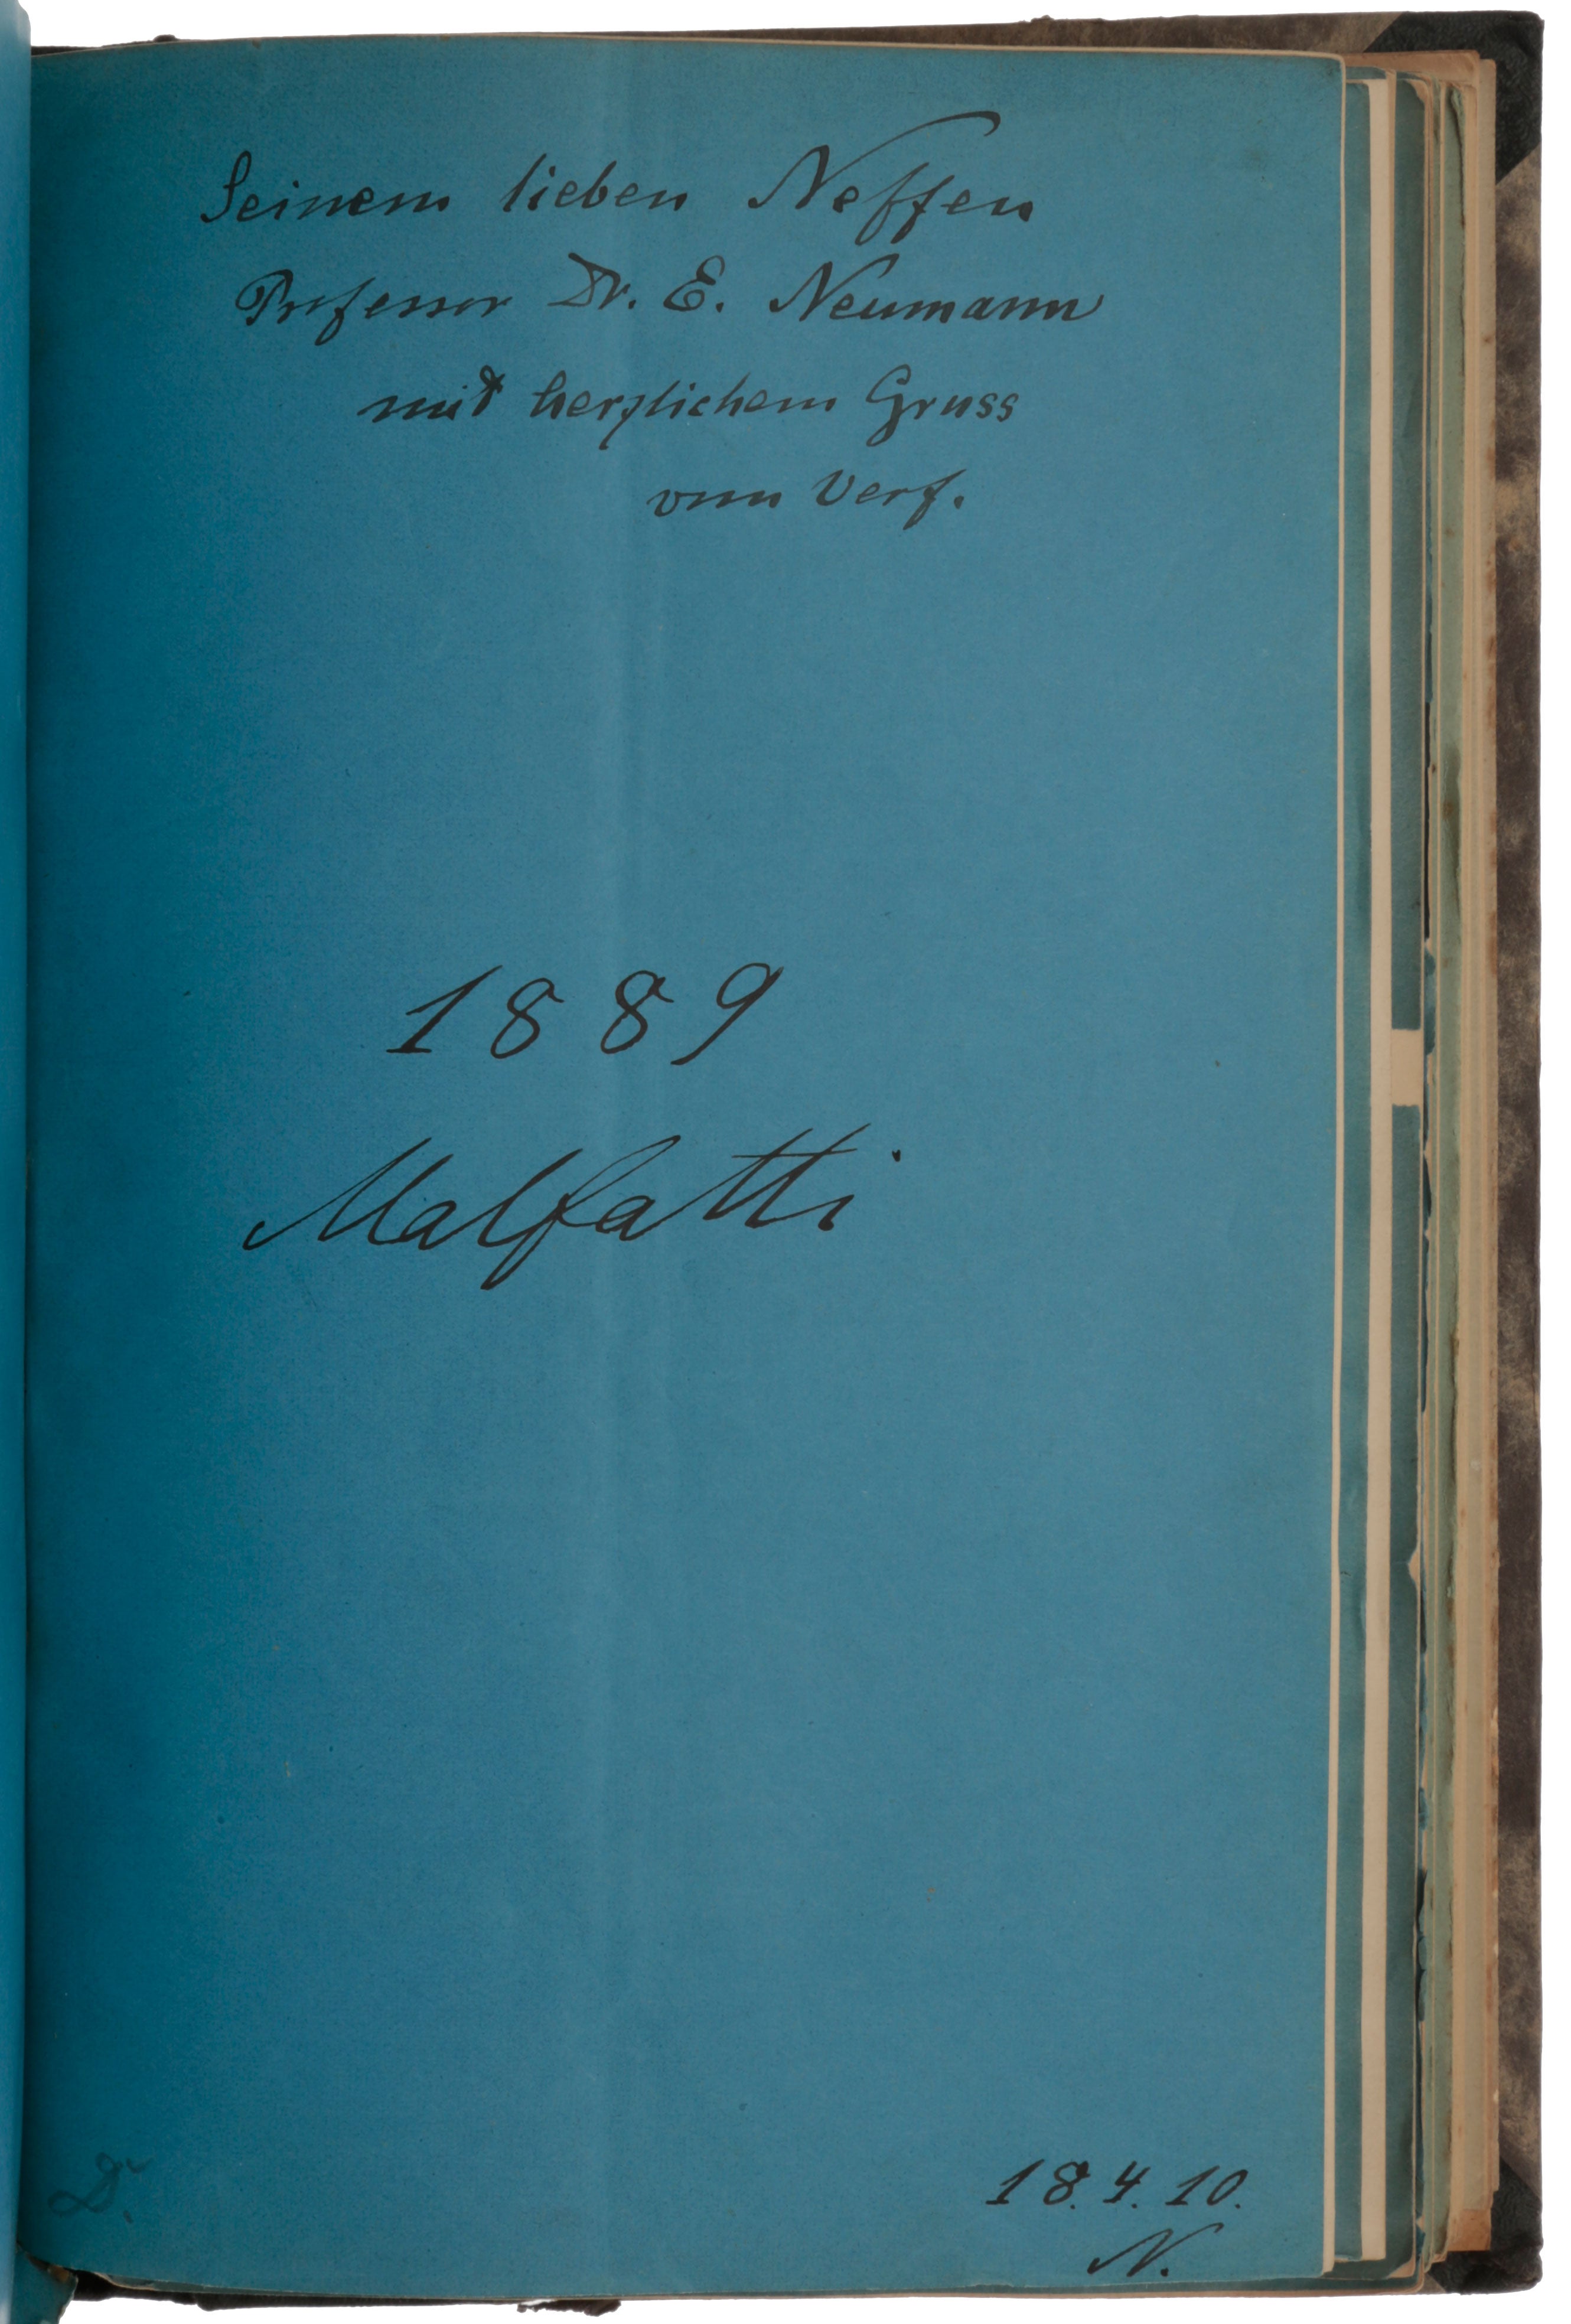 Item #4934 Bound collection of some 140 offprints, of which 28 are inscribed and several have annotations in the text, documenting Neumann’s contributions to electromagnetism and potential theory, the subjects for which he is best known today. Carl Gottfried NEUMANN.